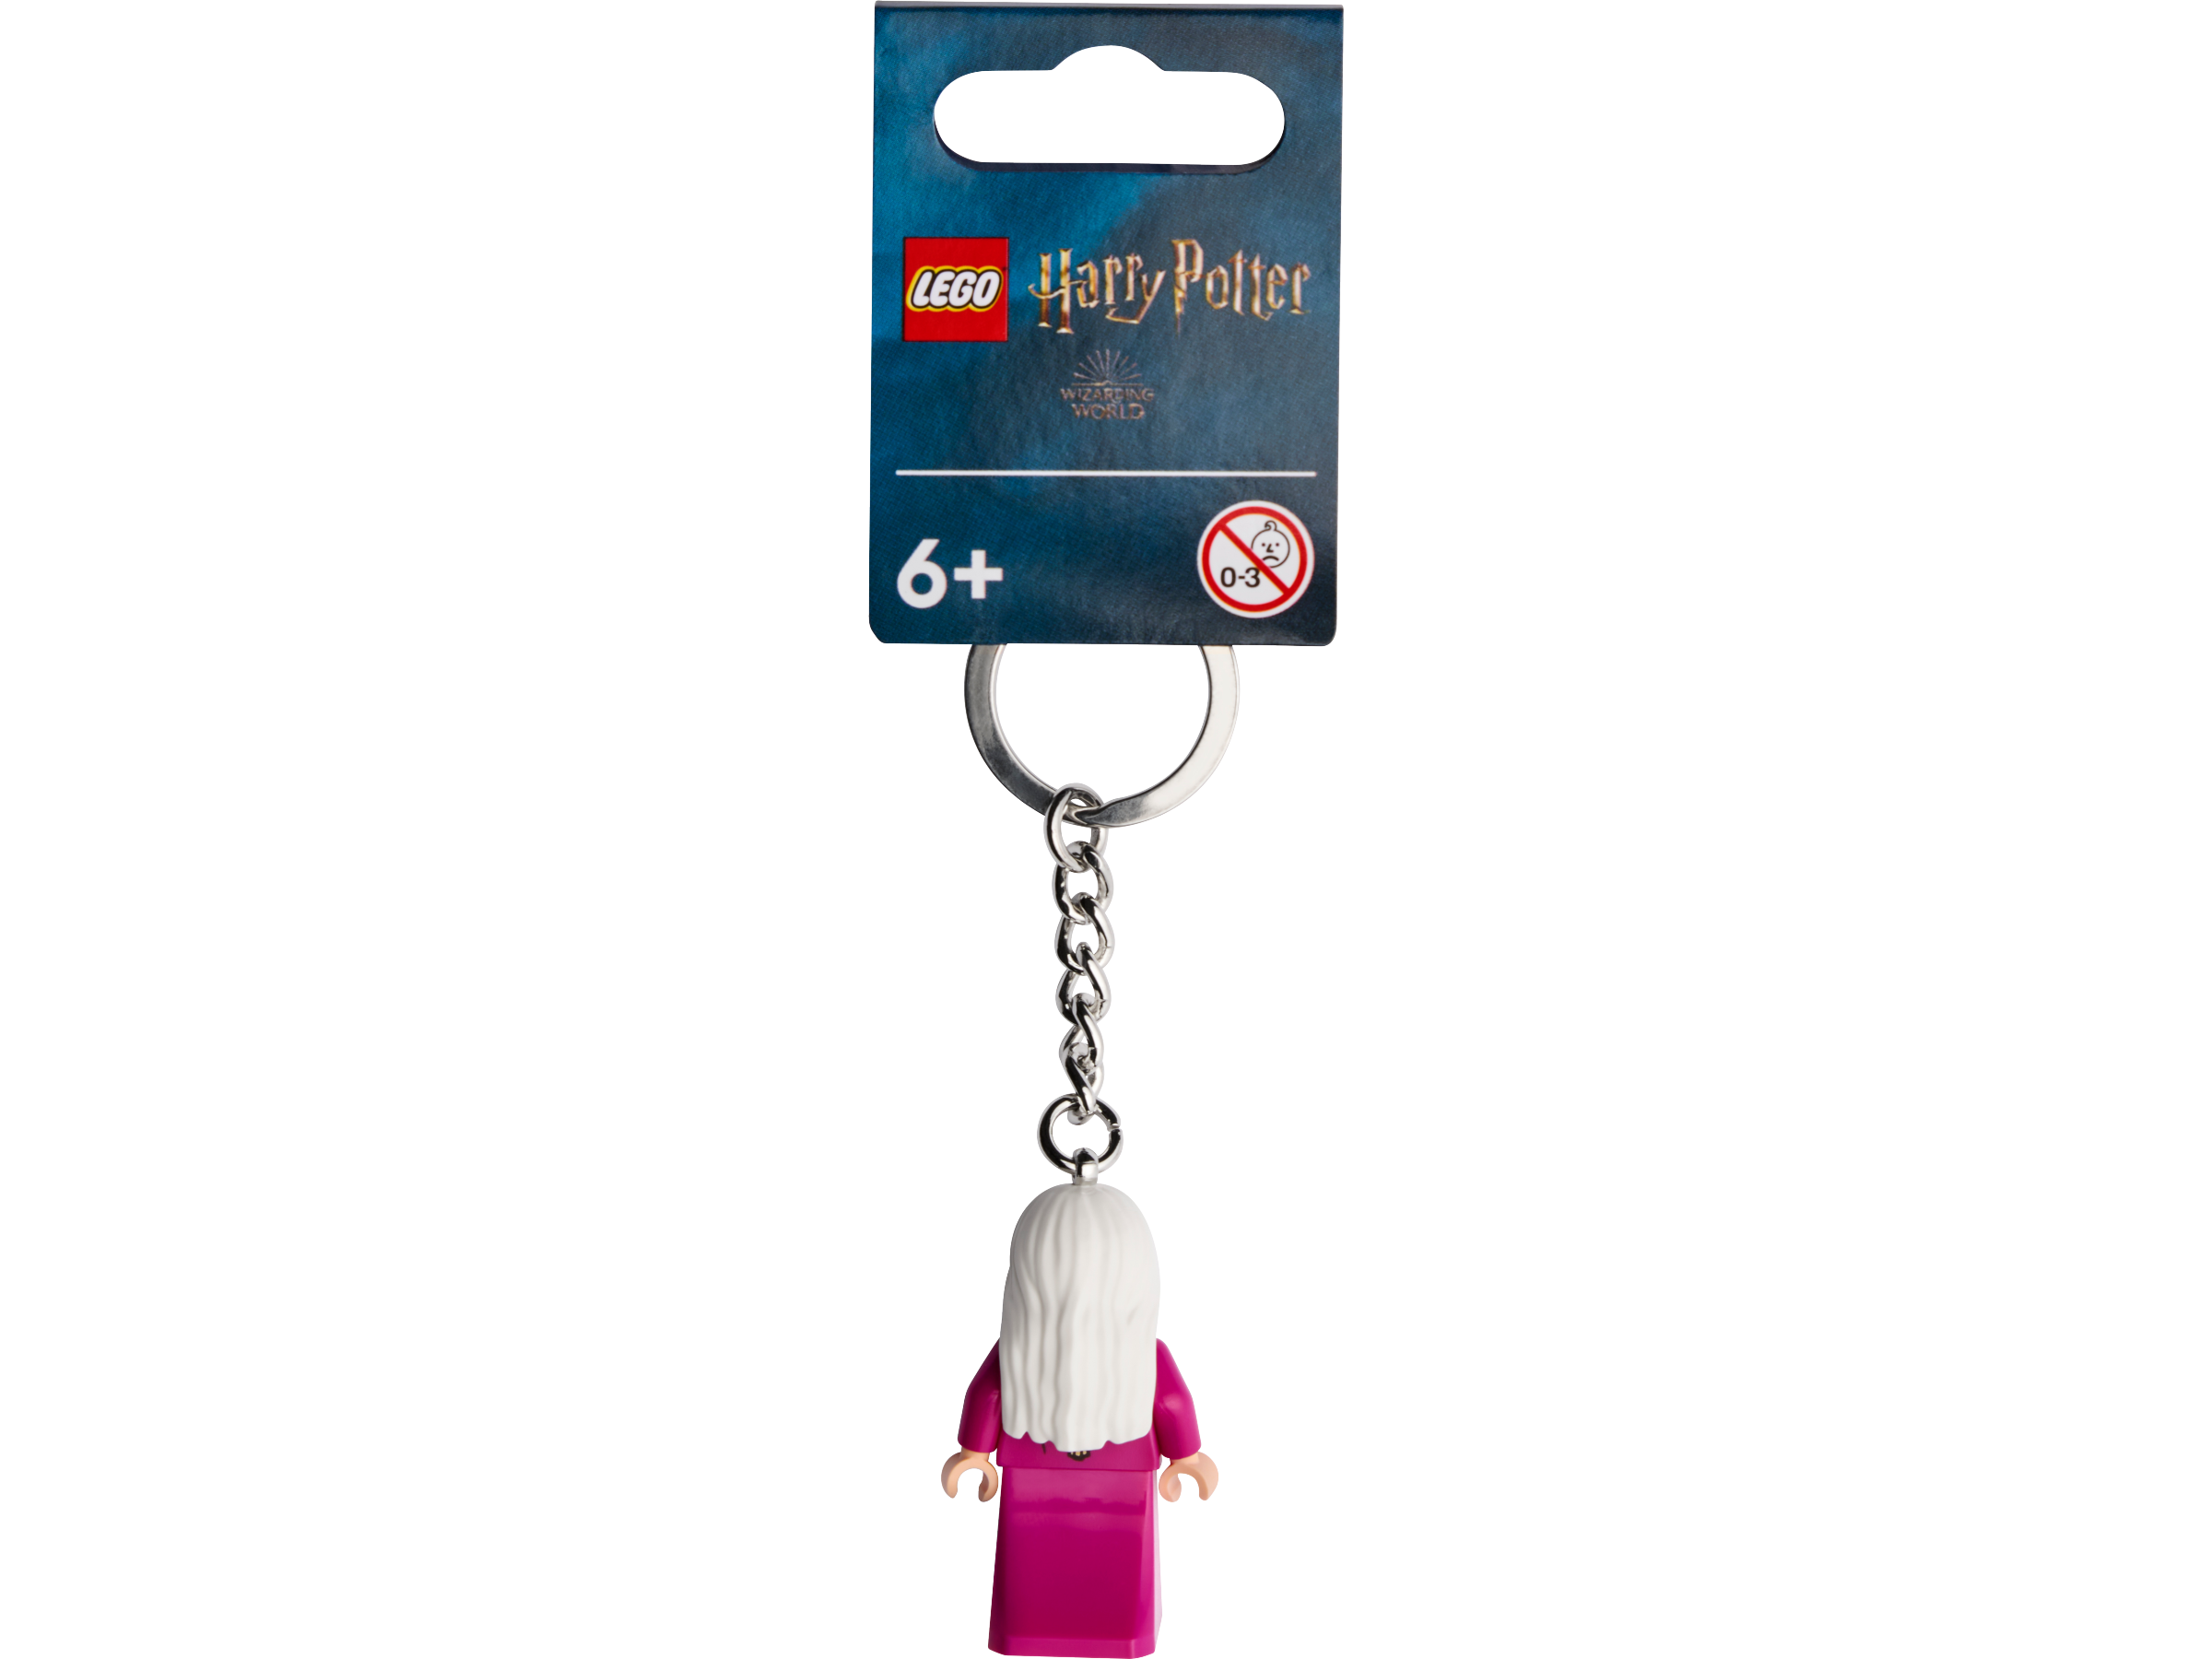 Harry Potter Hermione Dumbledore inspired minifigure keyring keychain gift 637 